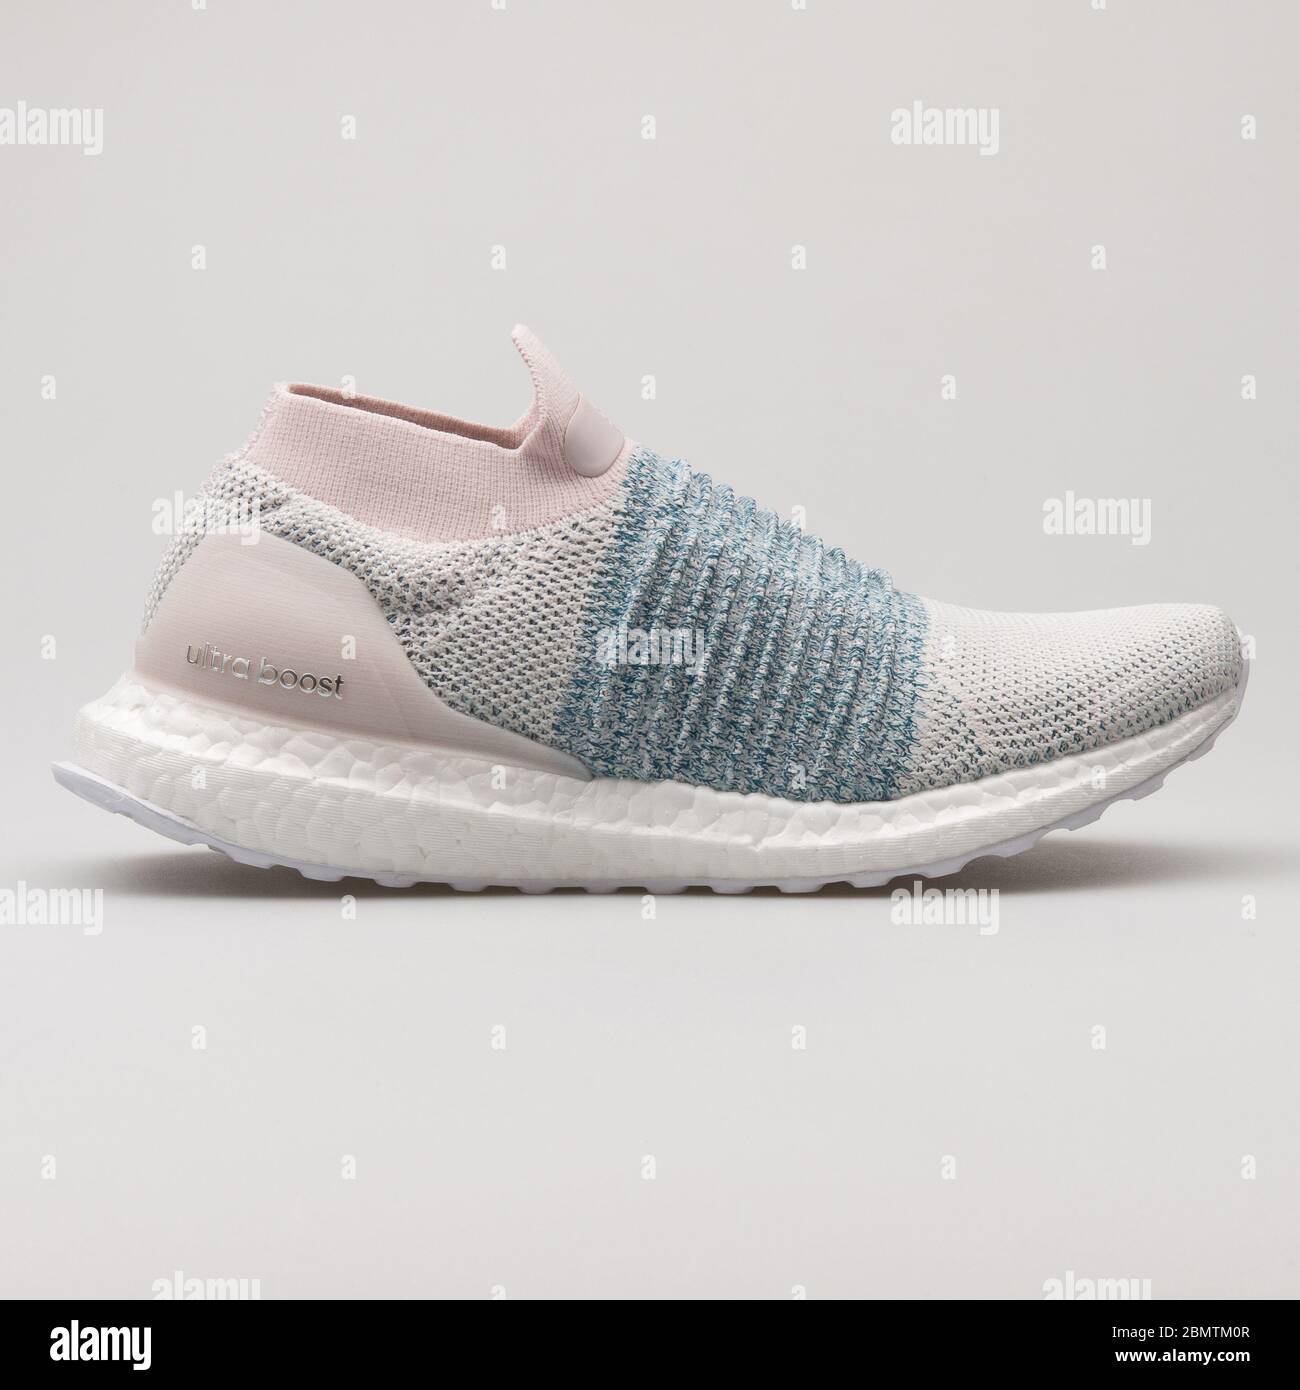 Adidas ultra boost photography and - Alamy